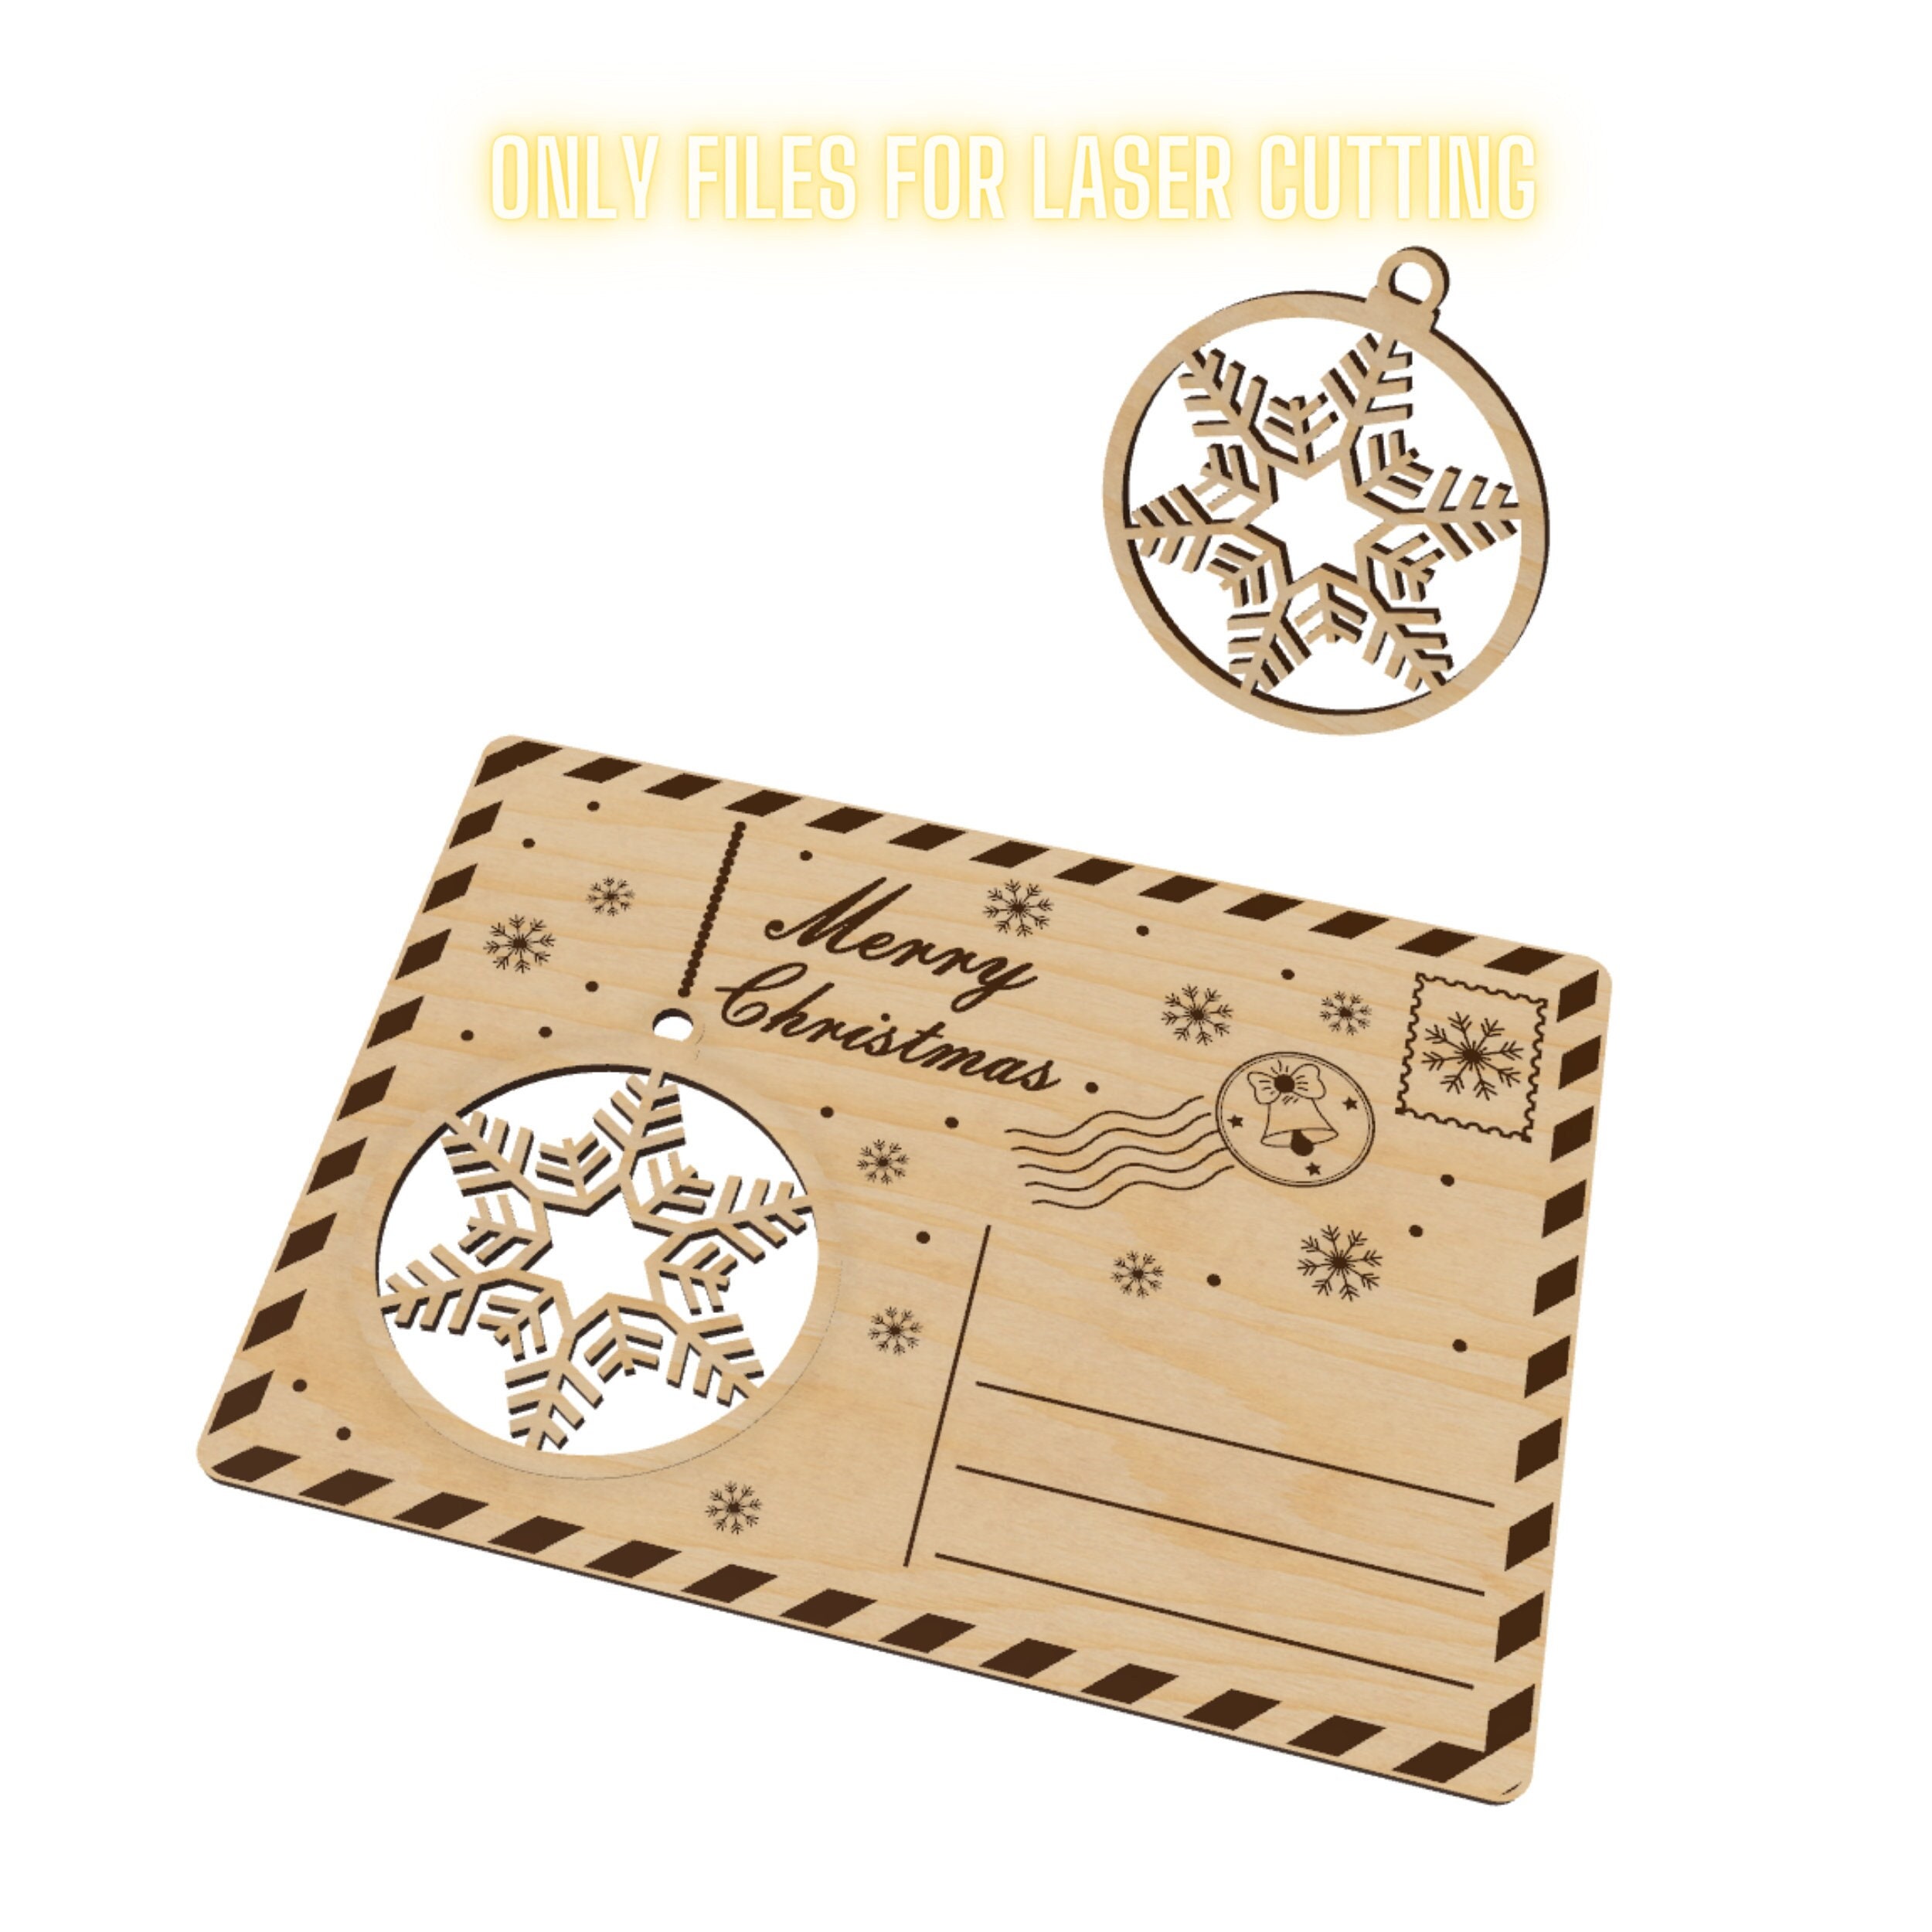 Blank Postcards - Laser Cut Template Files for Wood, Acrylic or Leather.  Glowforge ai, cdr, dxf, eps, pdf and svg.